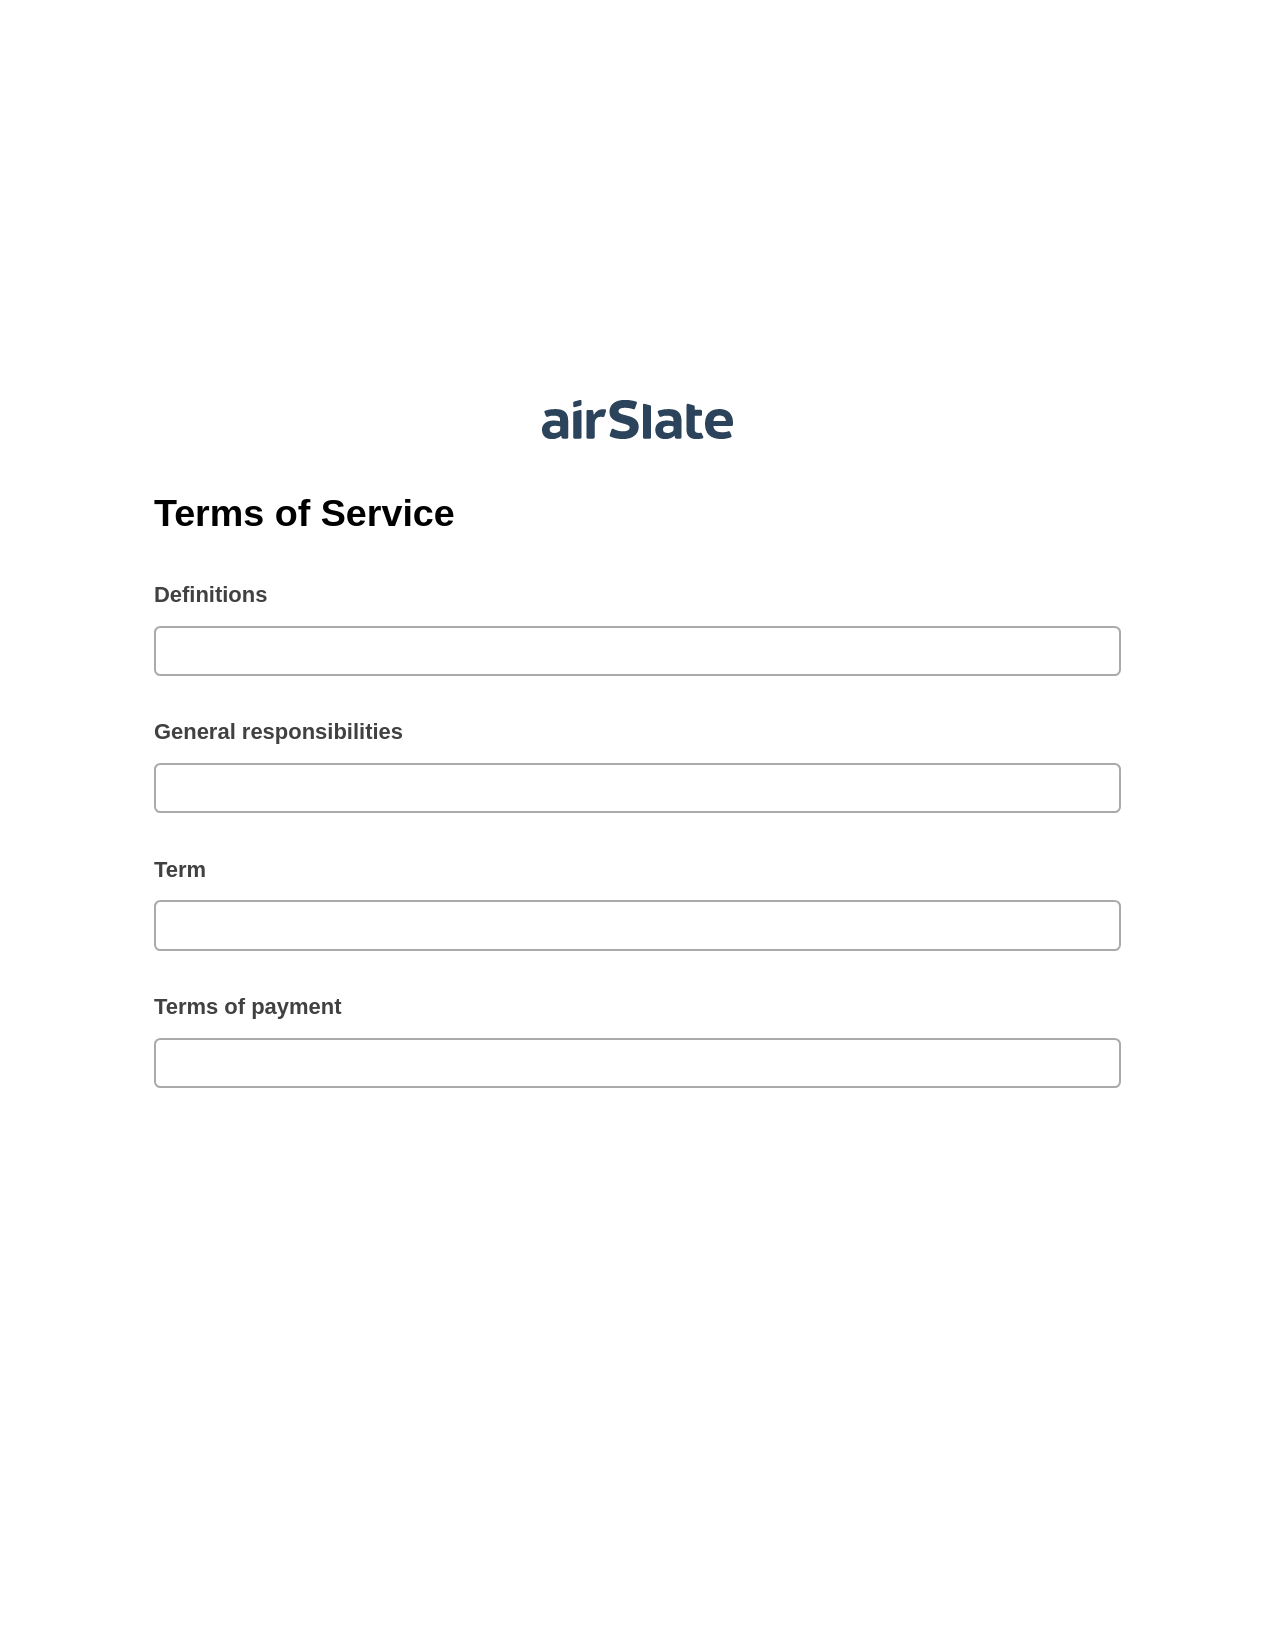 Terms of Service Pre-fill Slate from MS Dynamics 365 Records Bot, Assign Roles to Recipients Bot, Export to NetSuite Record Bot